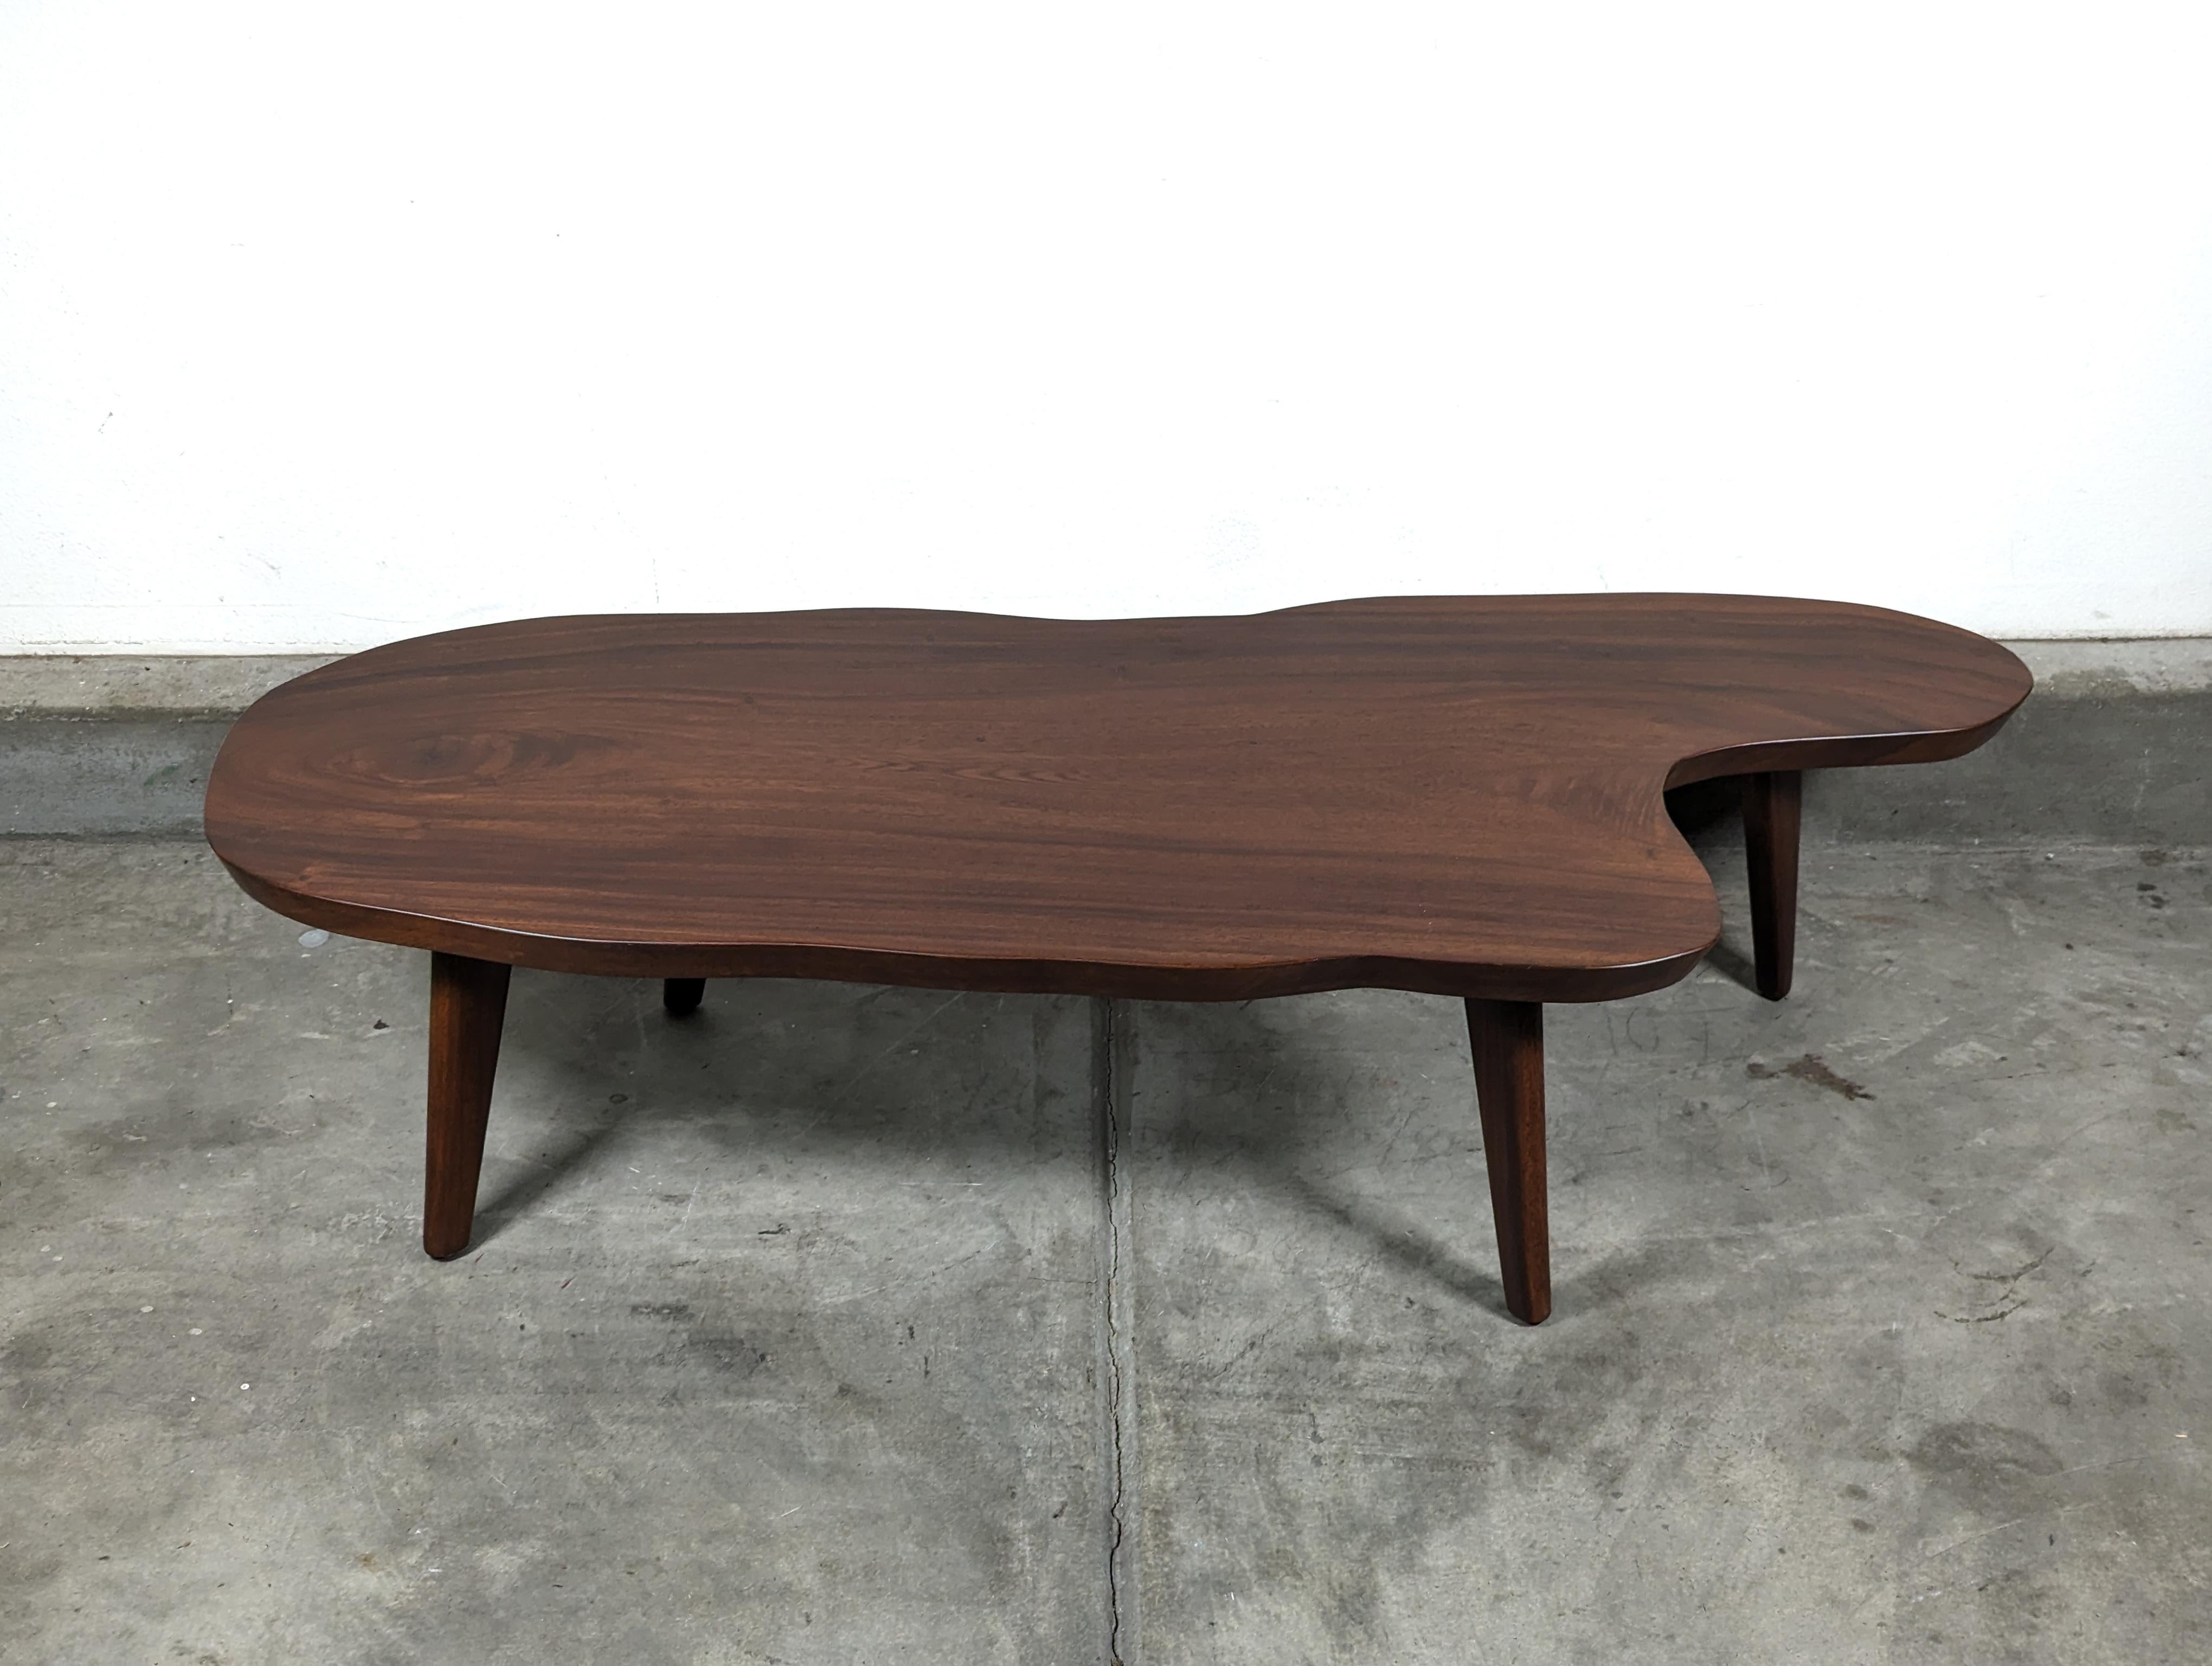 Nestled within the confines of your living space, this exquisite mid-century modern coffee table, circa 1970s, becomes an immediate conversation piece. Crafted from a single, solid slab of the enchanting monkey pod wood, likely sourced from the lush